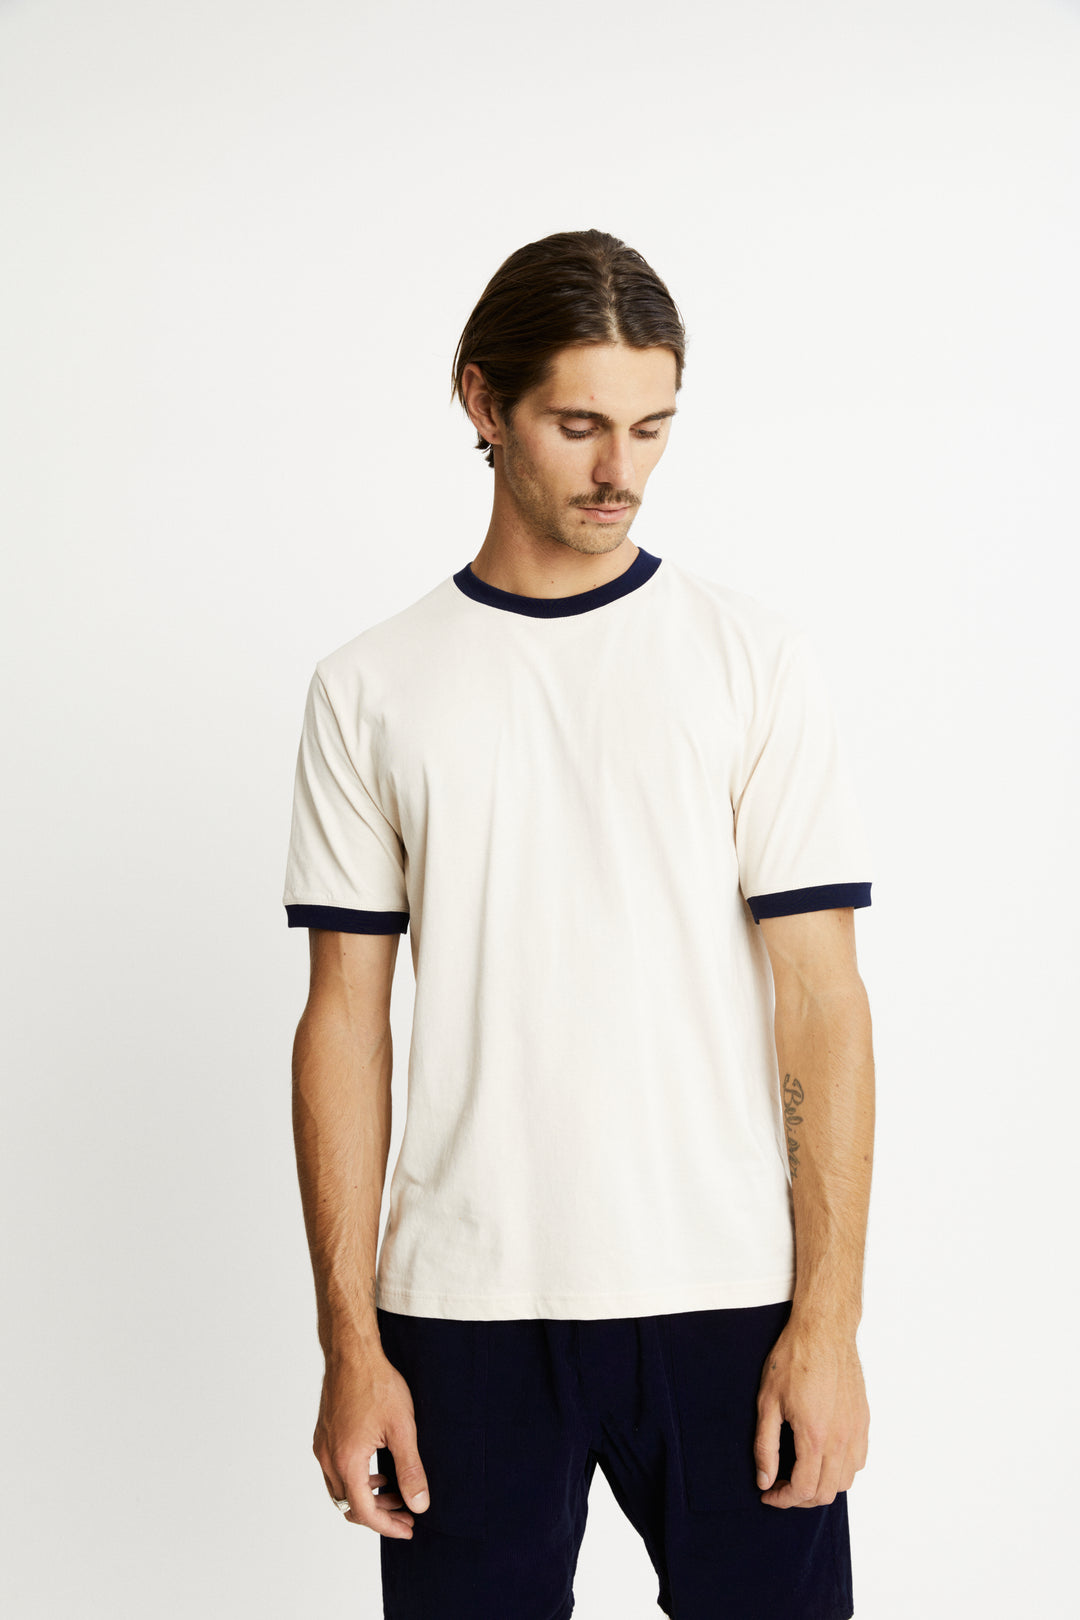 Mr Simple - Knox Ringer Tee in Natural with Navy Rib | Buster McGee